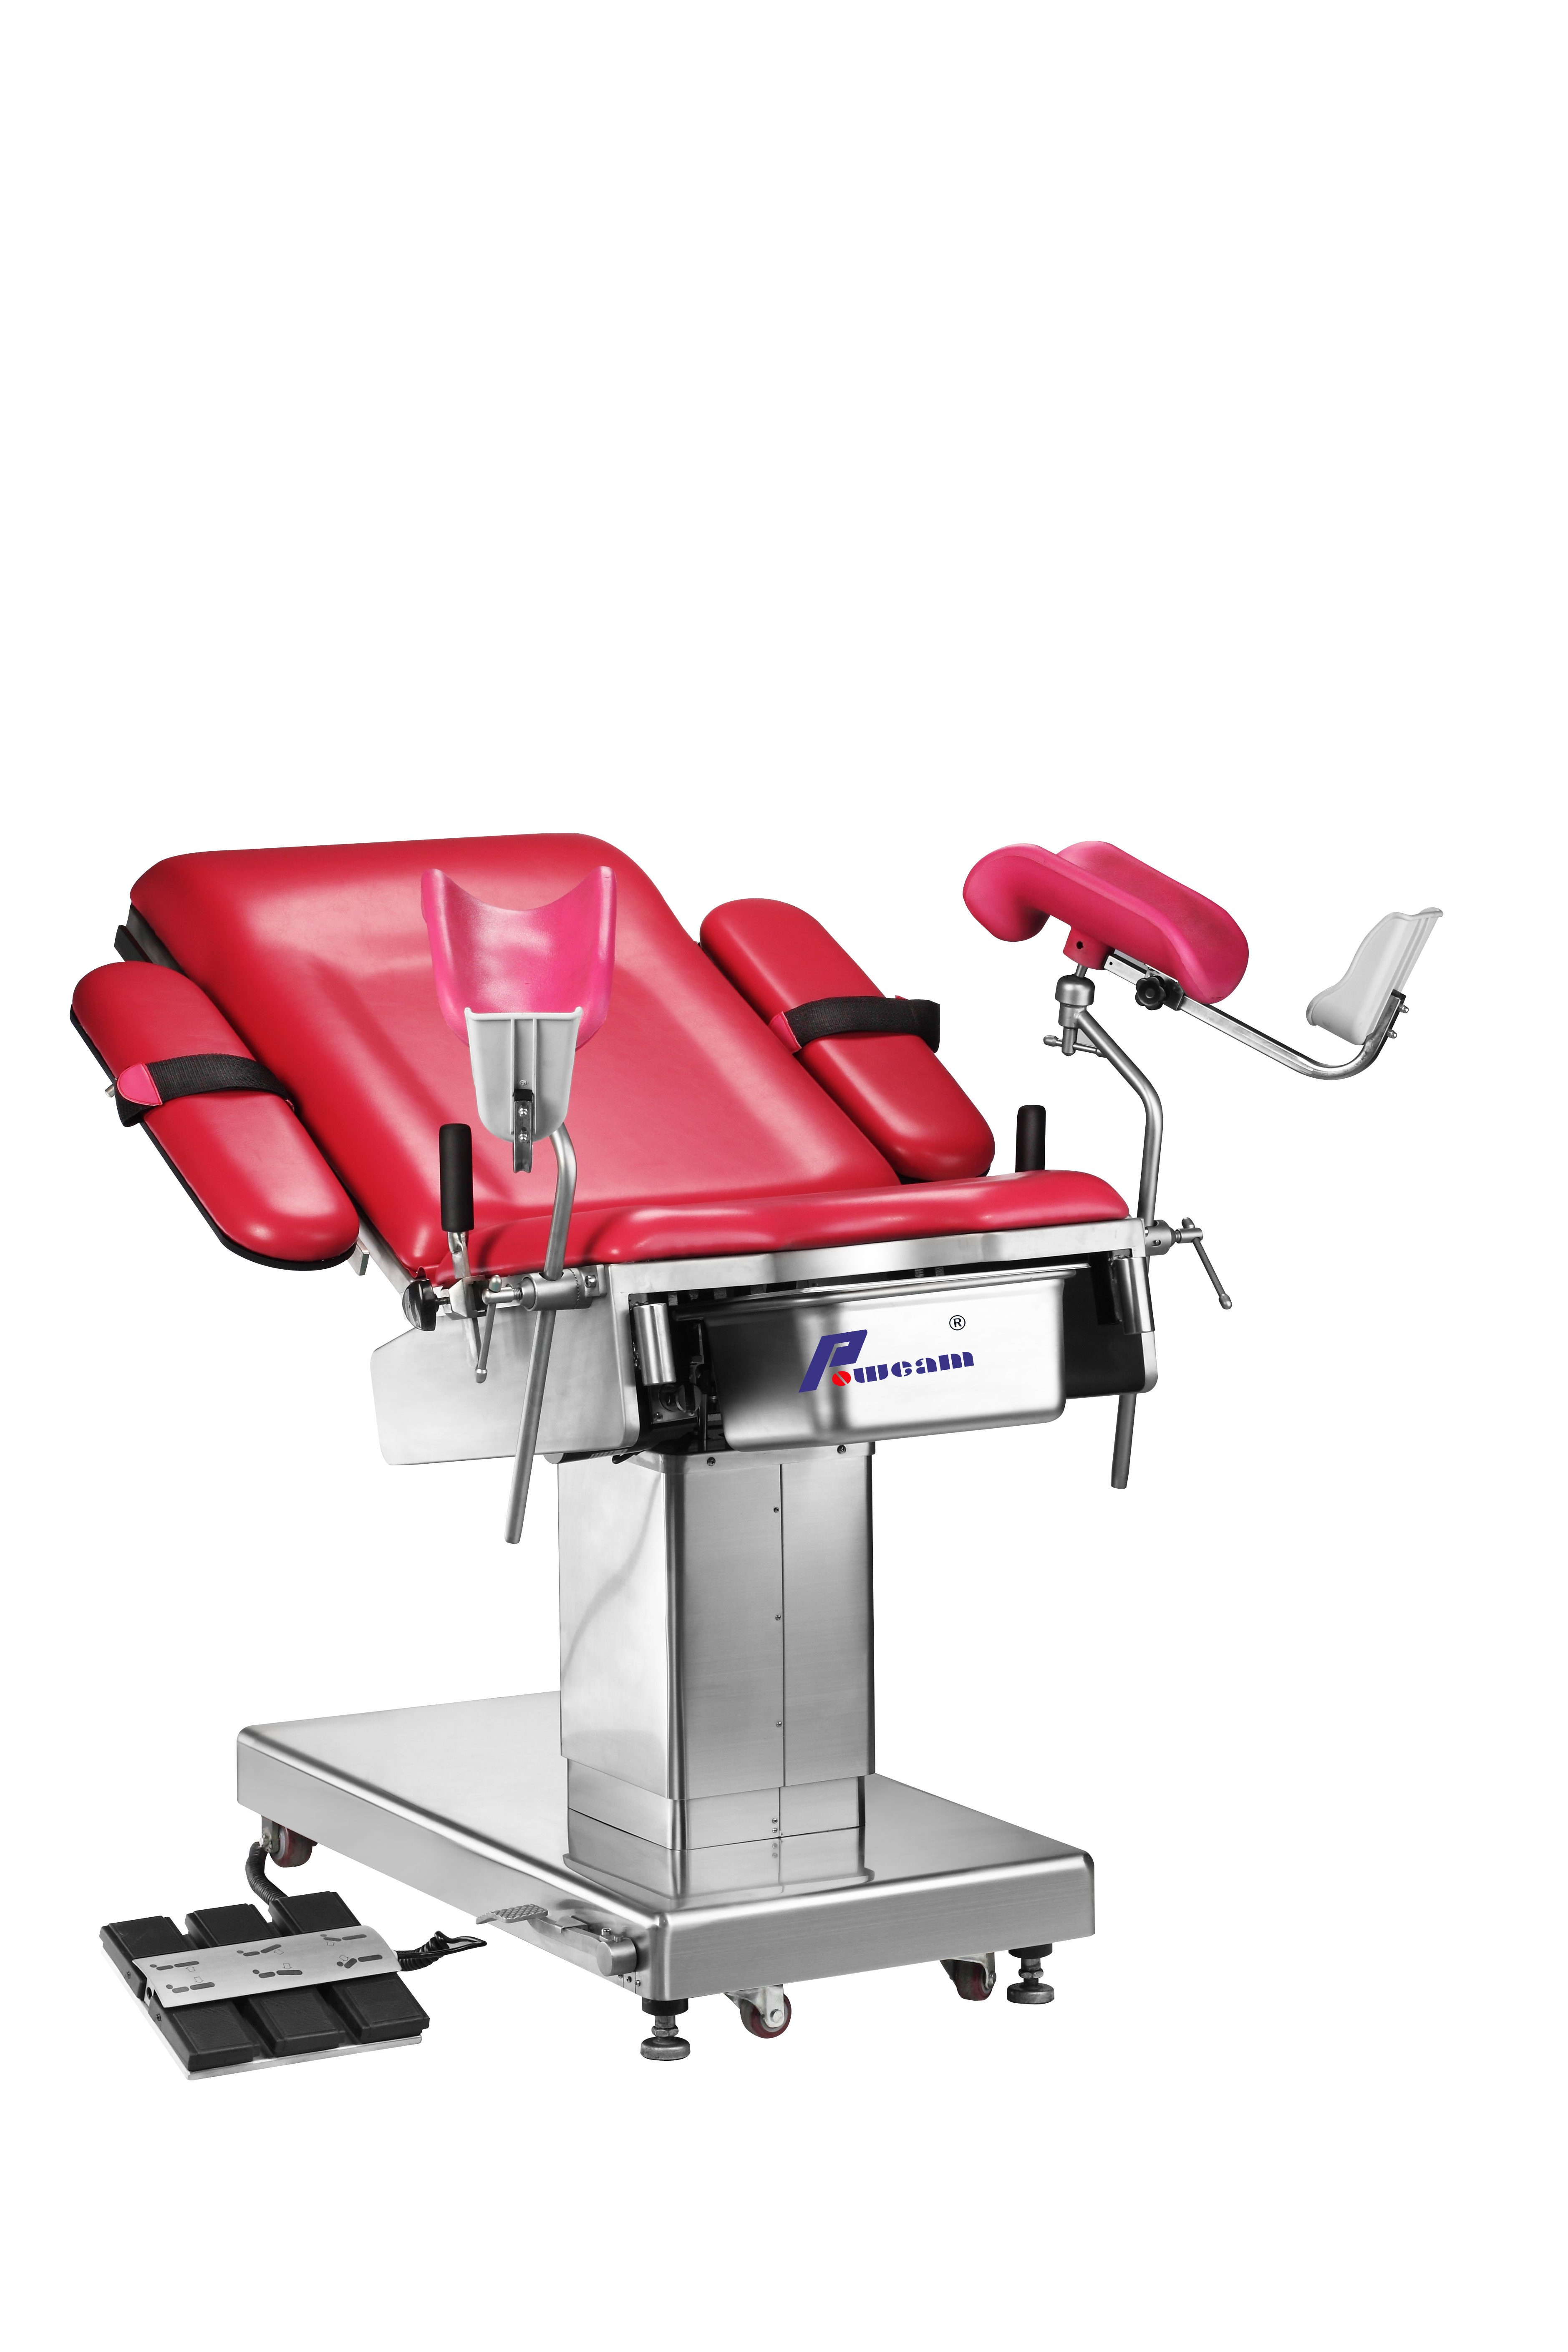 Hosipital Obstetric Gynecological Beds, Gynecological Exam Operating Table 